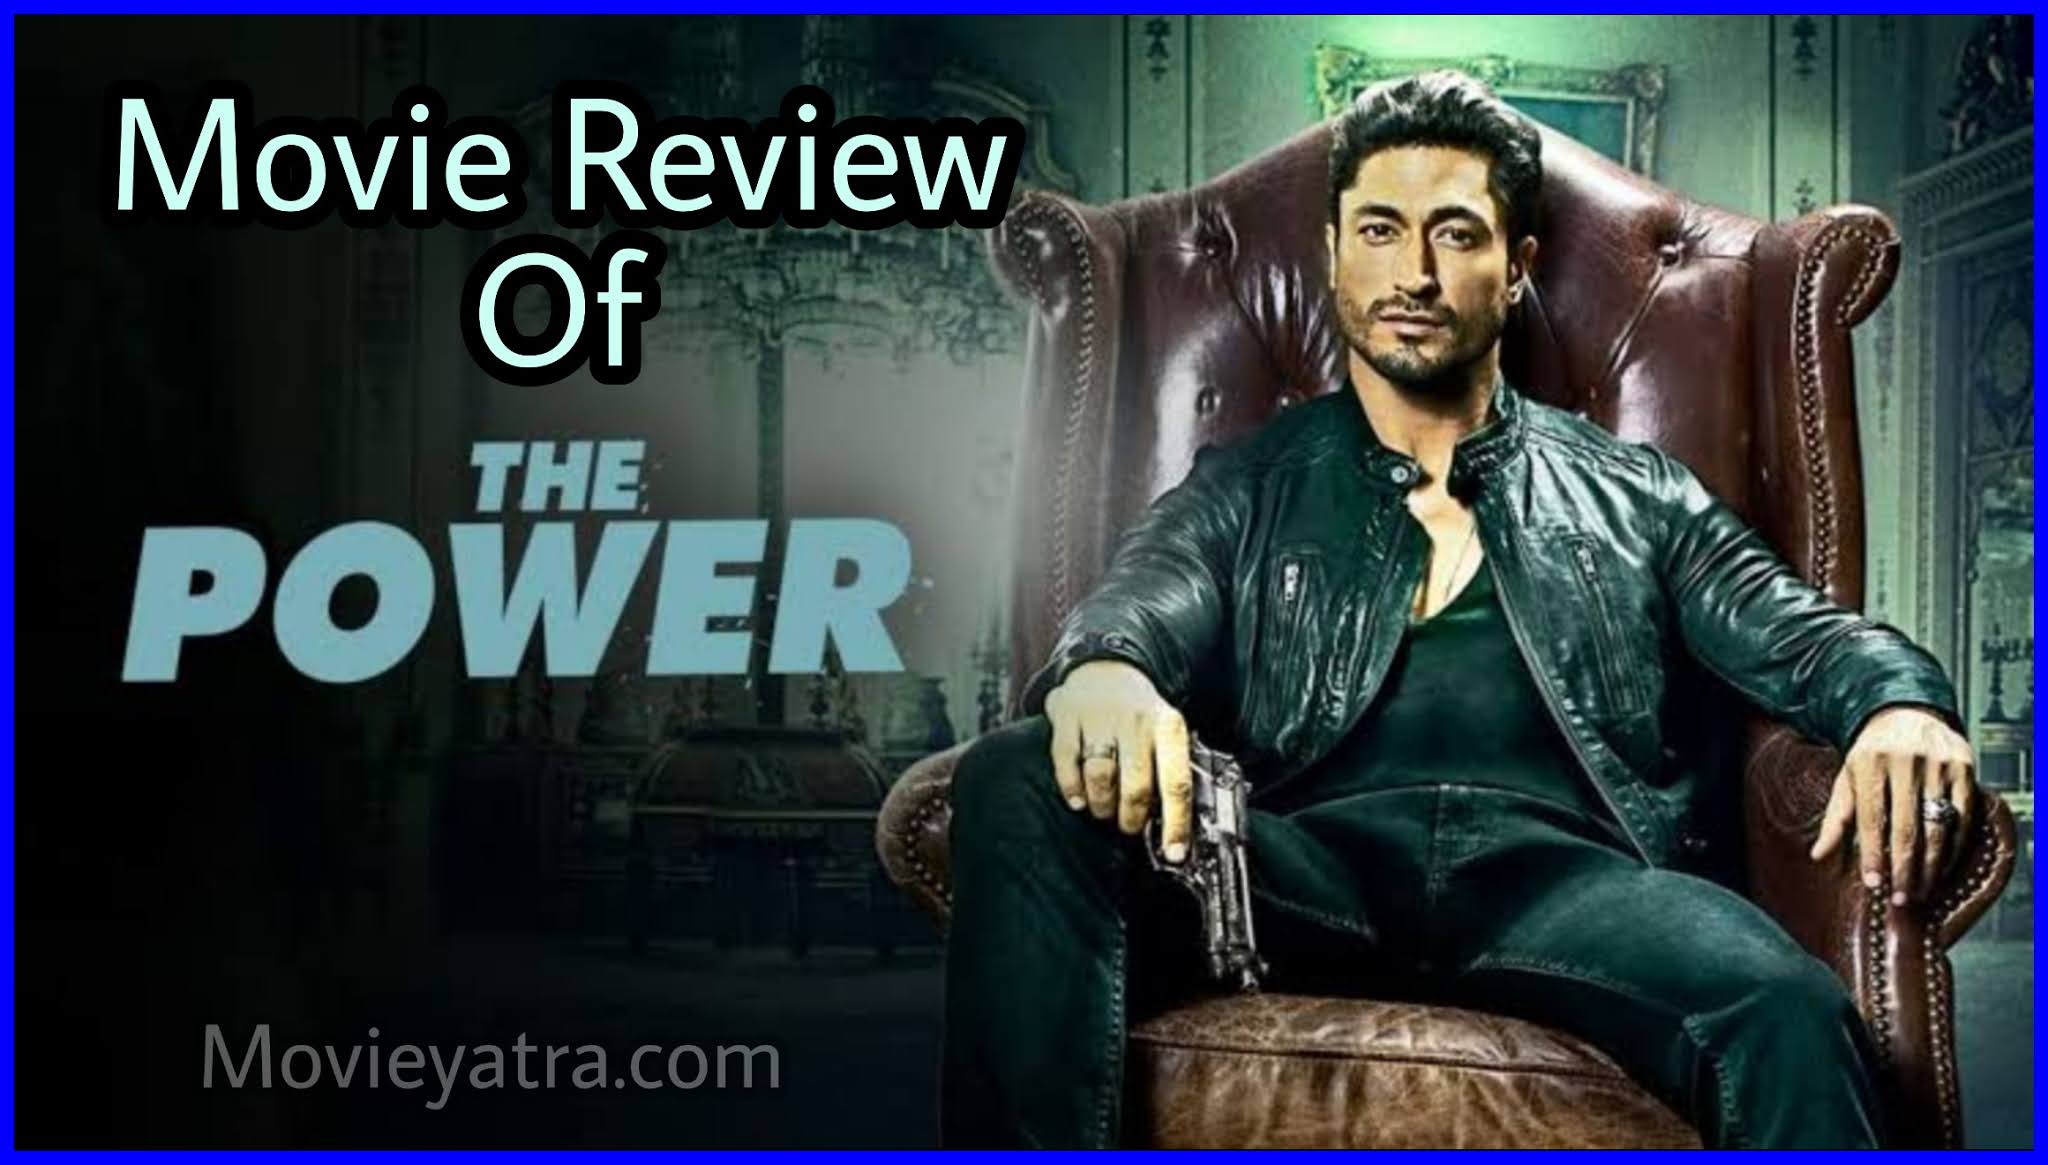 The Power Movie Review In Hindi How to Download The Power Movie 720ps, 680ps, 480ps, 360ps, The Power Movie Poster